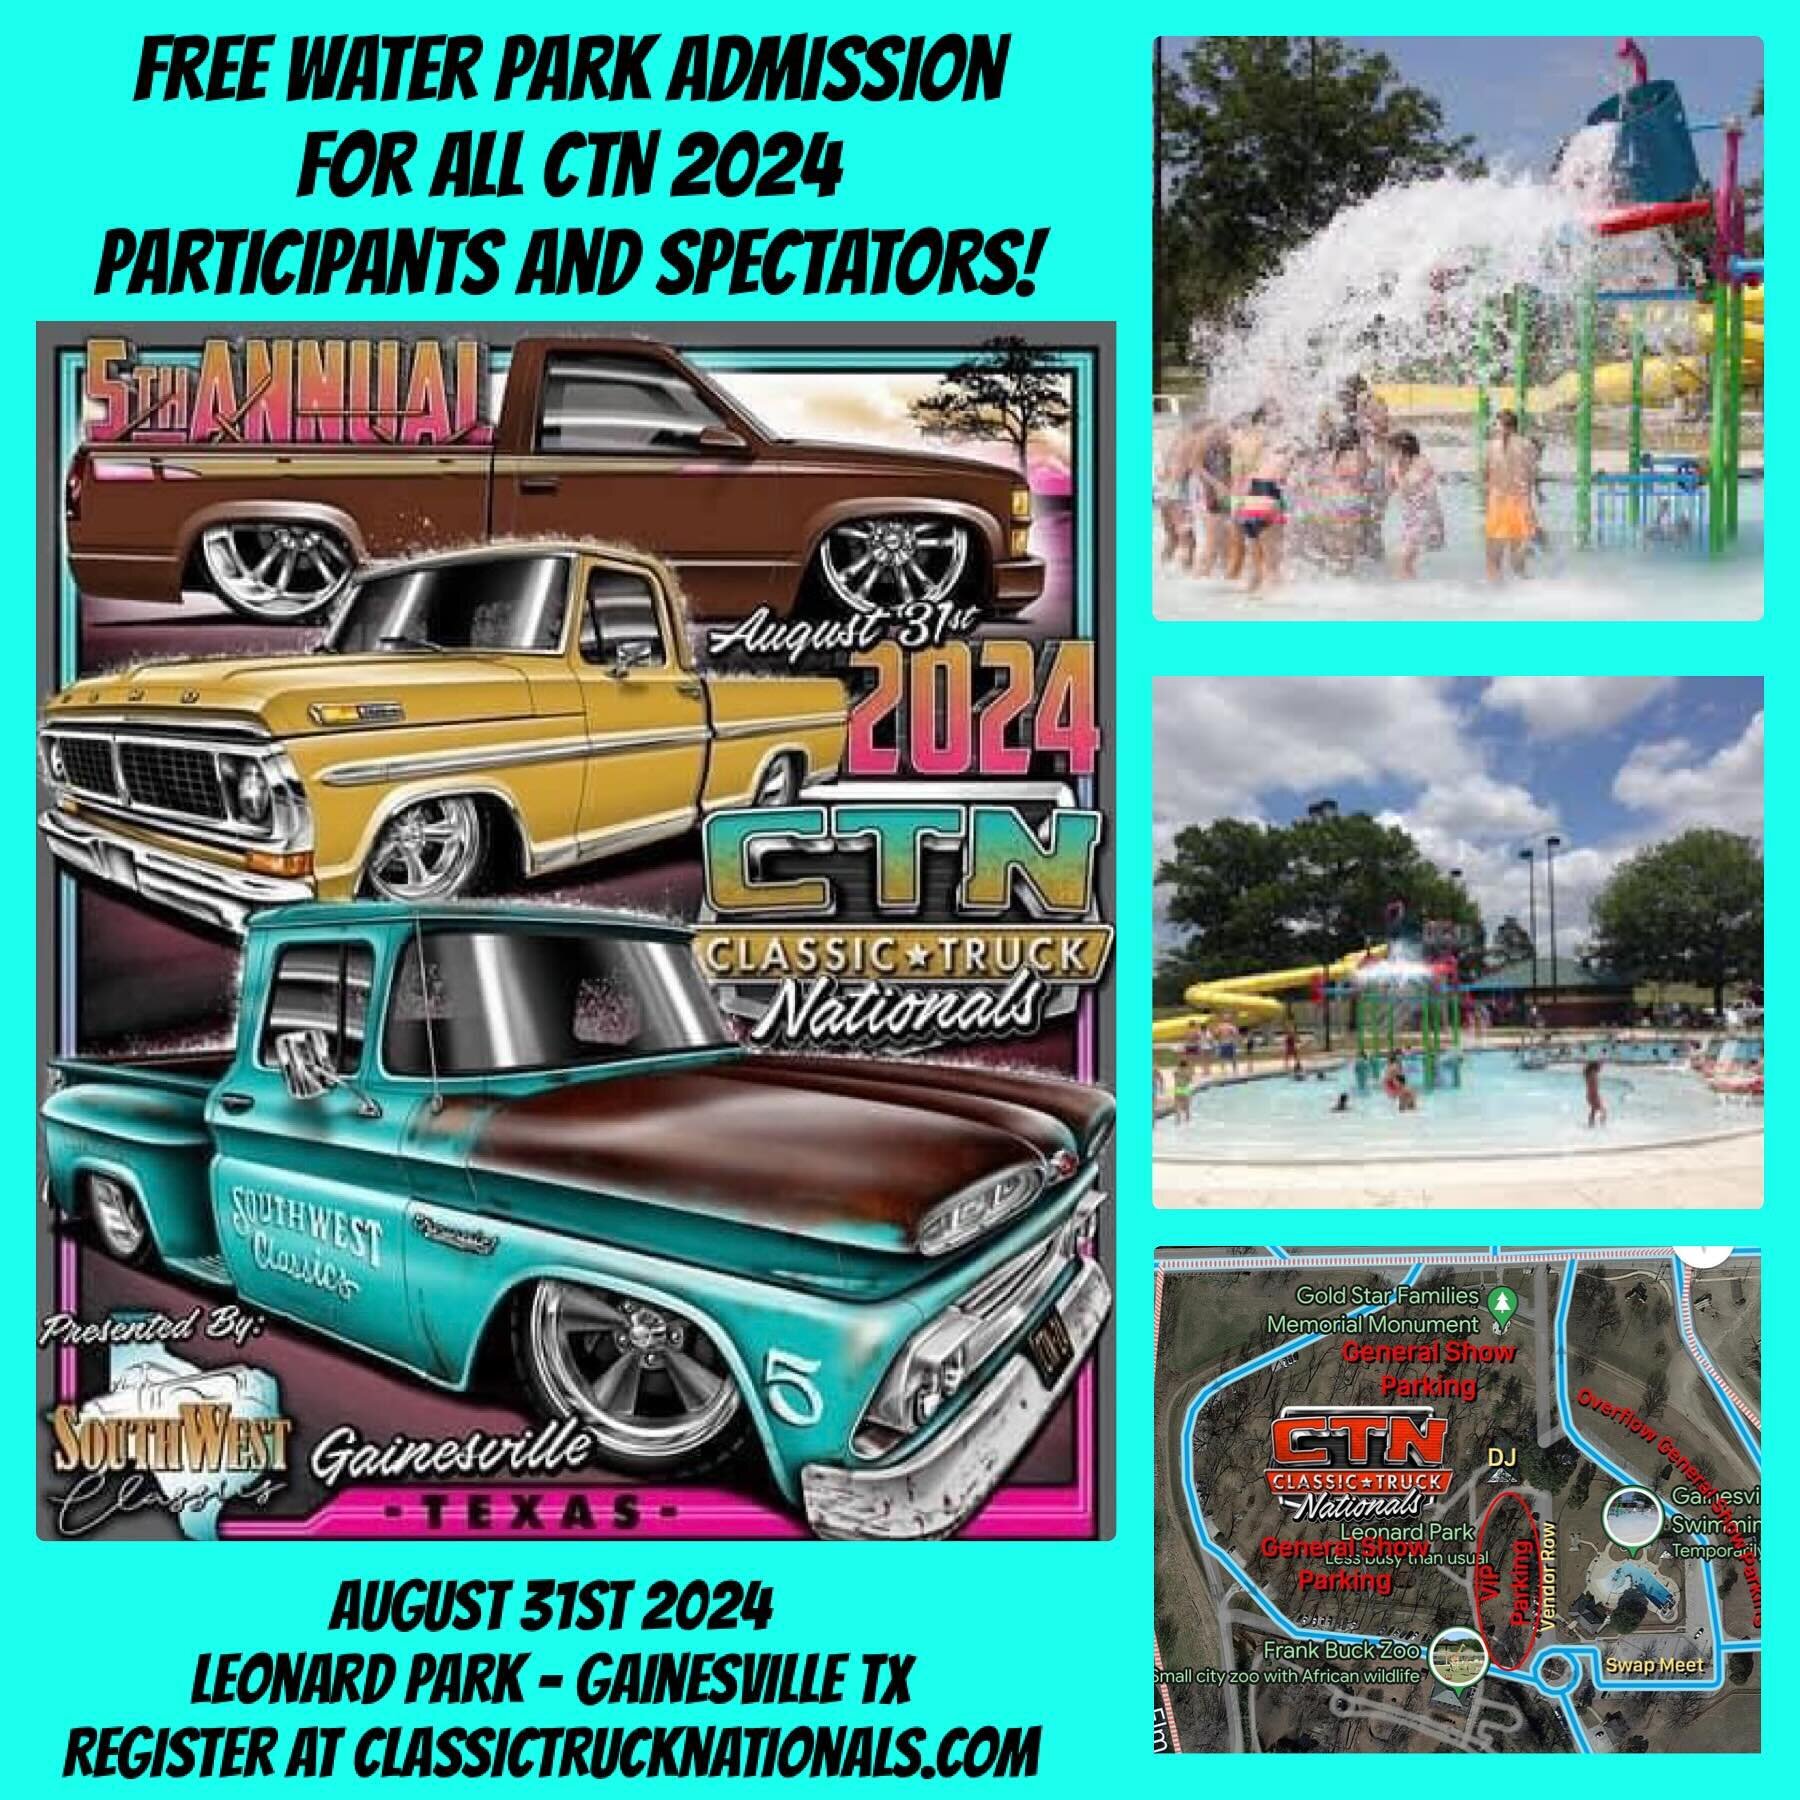 Reminder&hellip;Free admission to the onsite water park for all CTN 2024 Participants and spectators! Don&rsquo;t forget your swim wear and towels! CTN swim wear coming soon!
Frank Bunk Zoo is $7.50 / $9 (also onsite)
Bring the whole family out for a